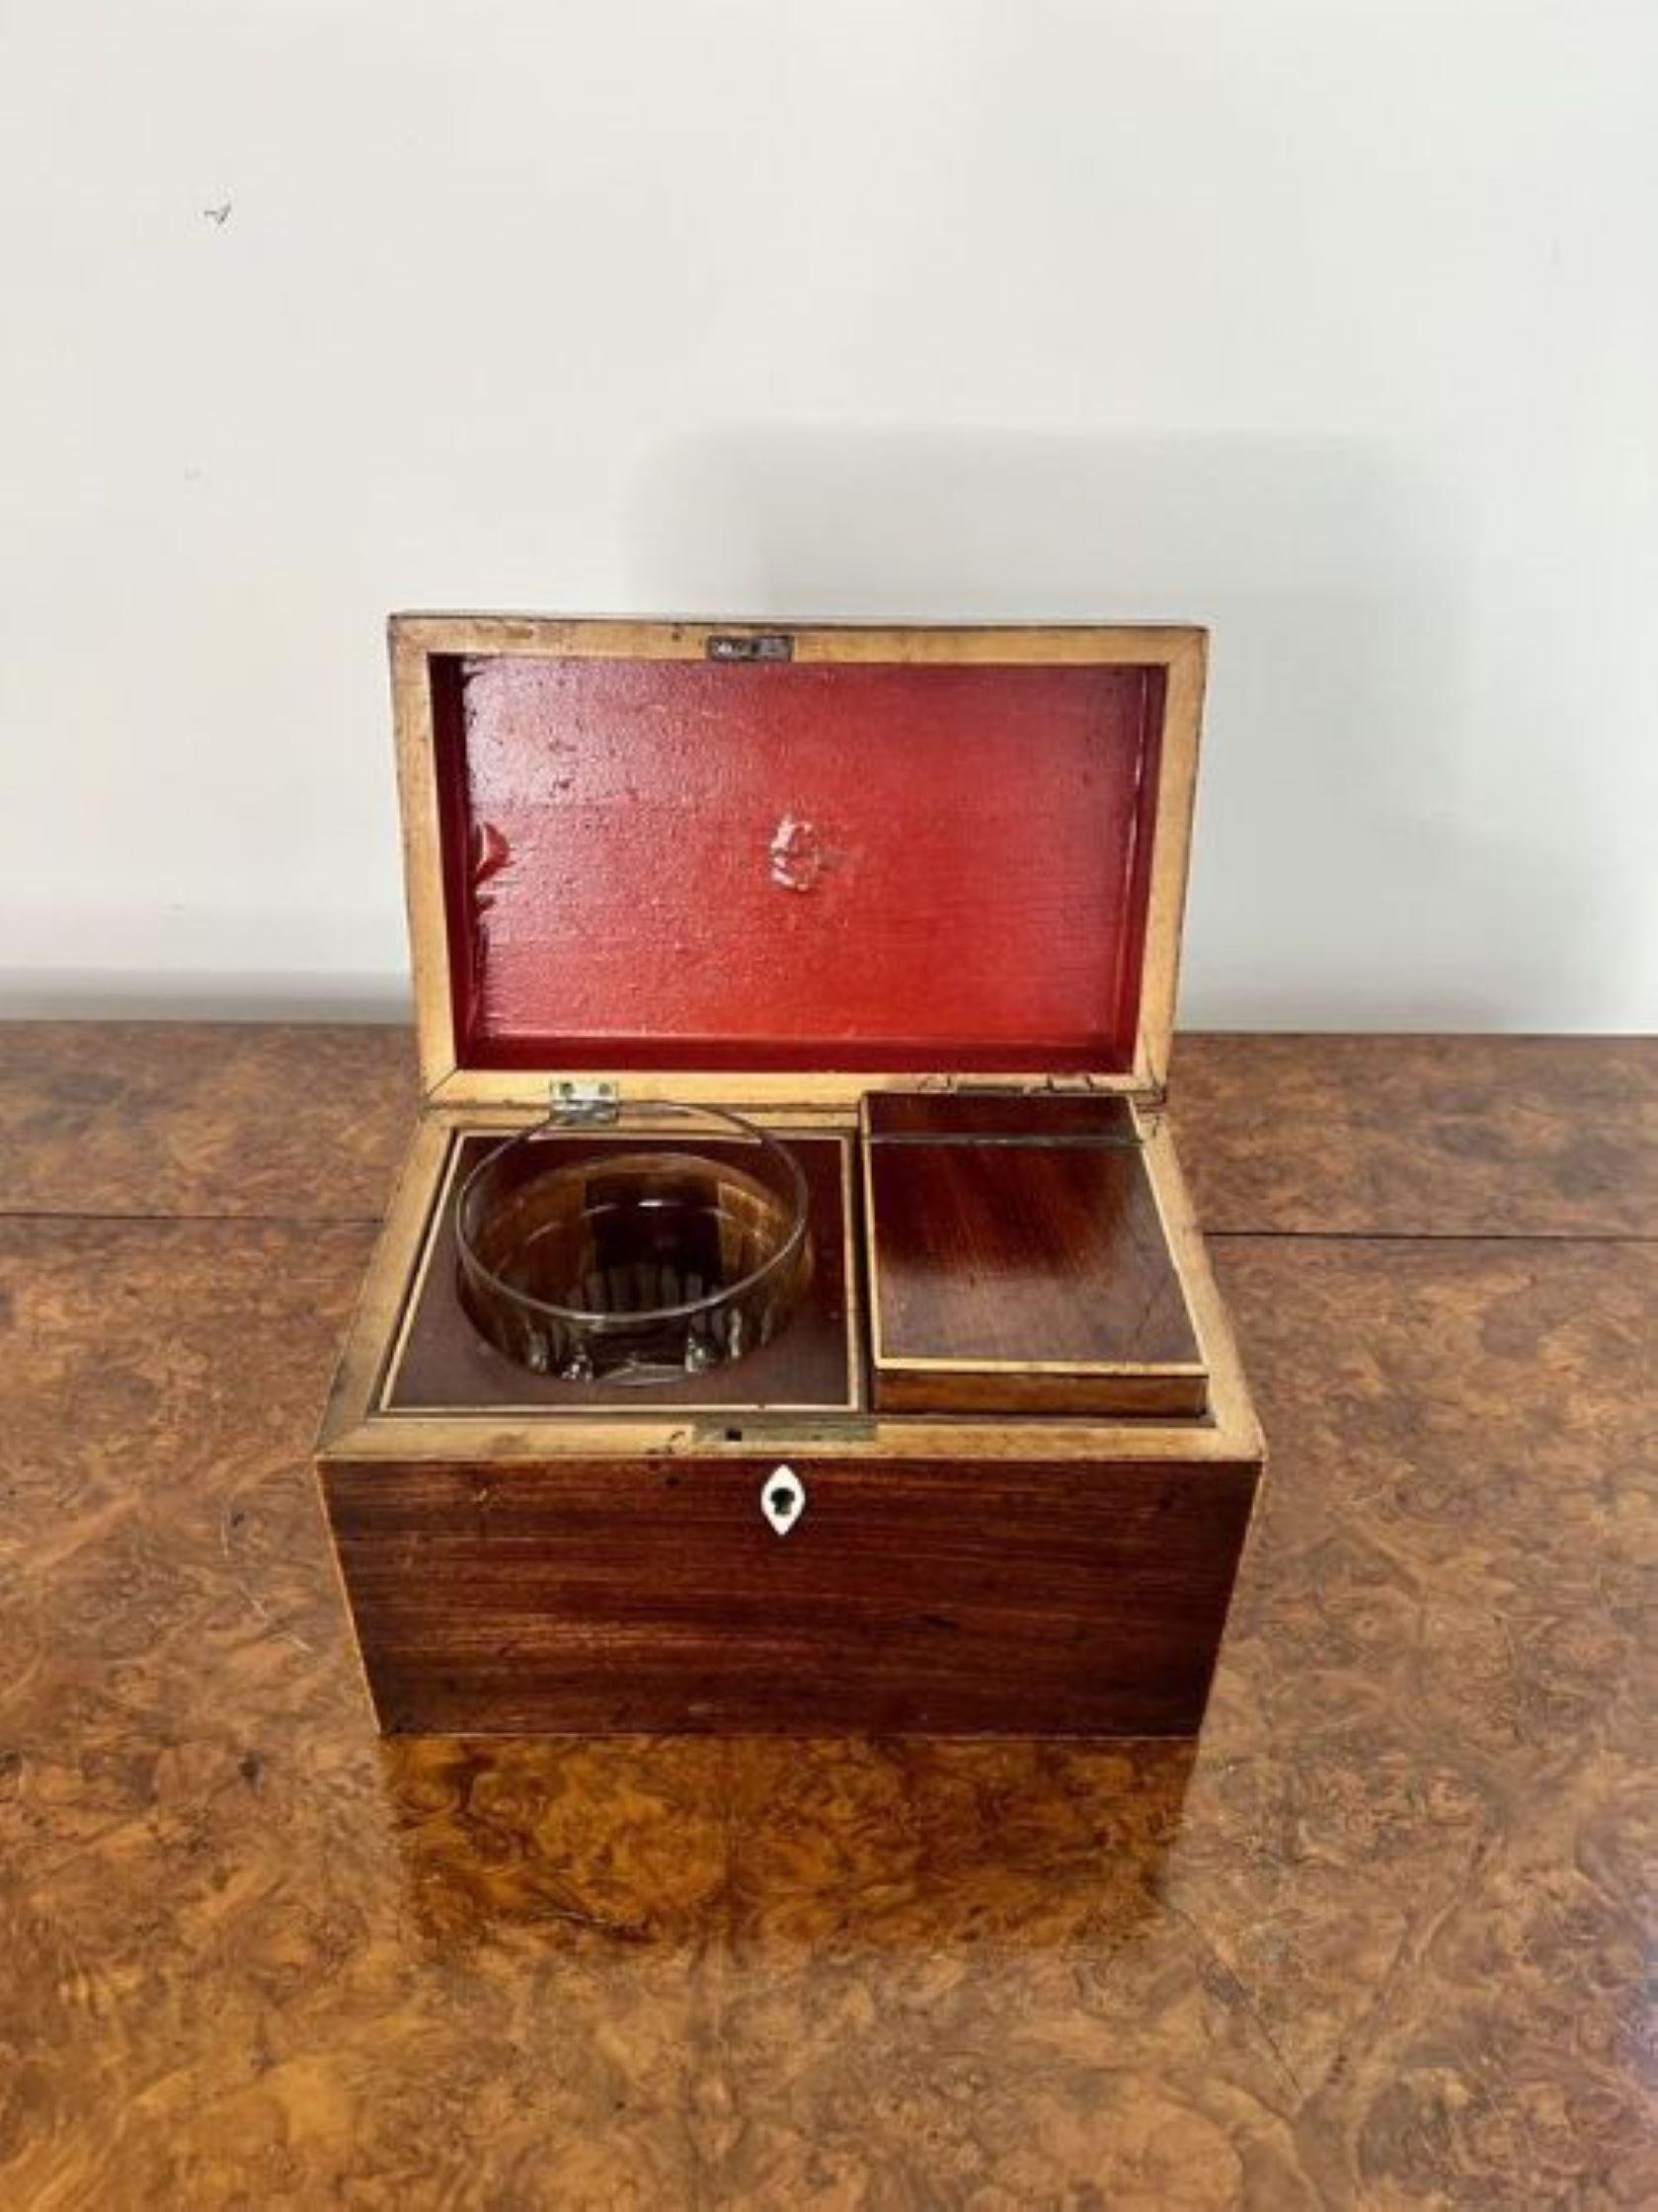 Antique George III quality mahogany tea caddy having a quality antique George III mahogany and satinwood inlaid stringing tea caddy with a lift up lid opening to reveal the original fitted interior, with the original handle to the top of the caddy.